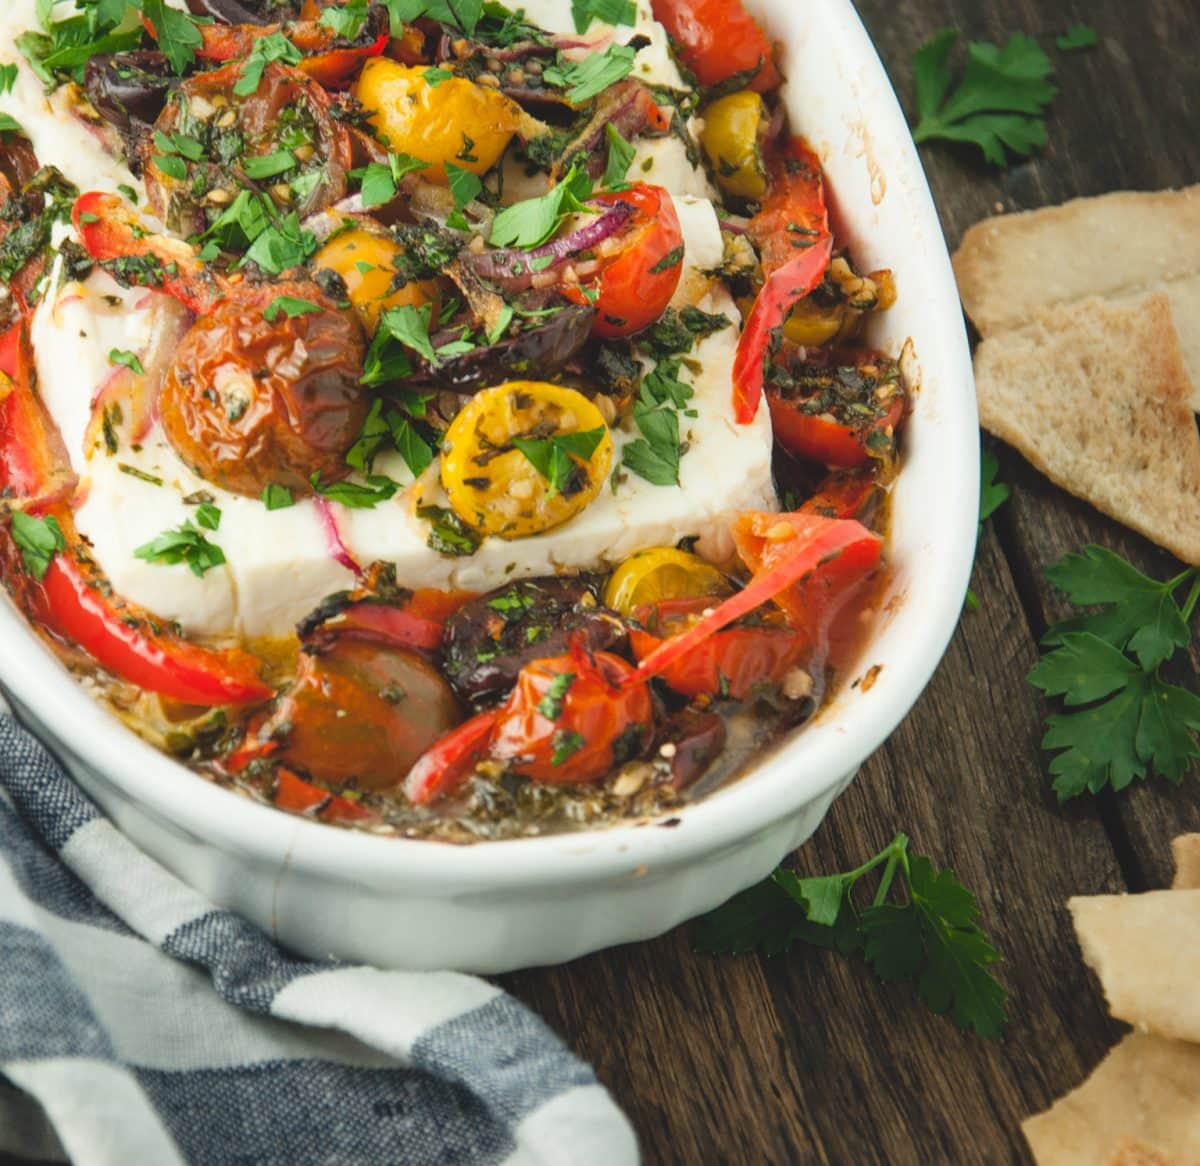 Baked Feta with Tomatoes and Olives - Feasting not Fasting